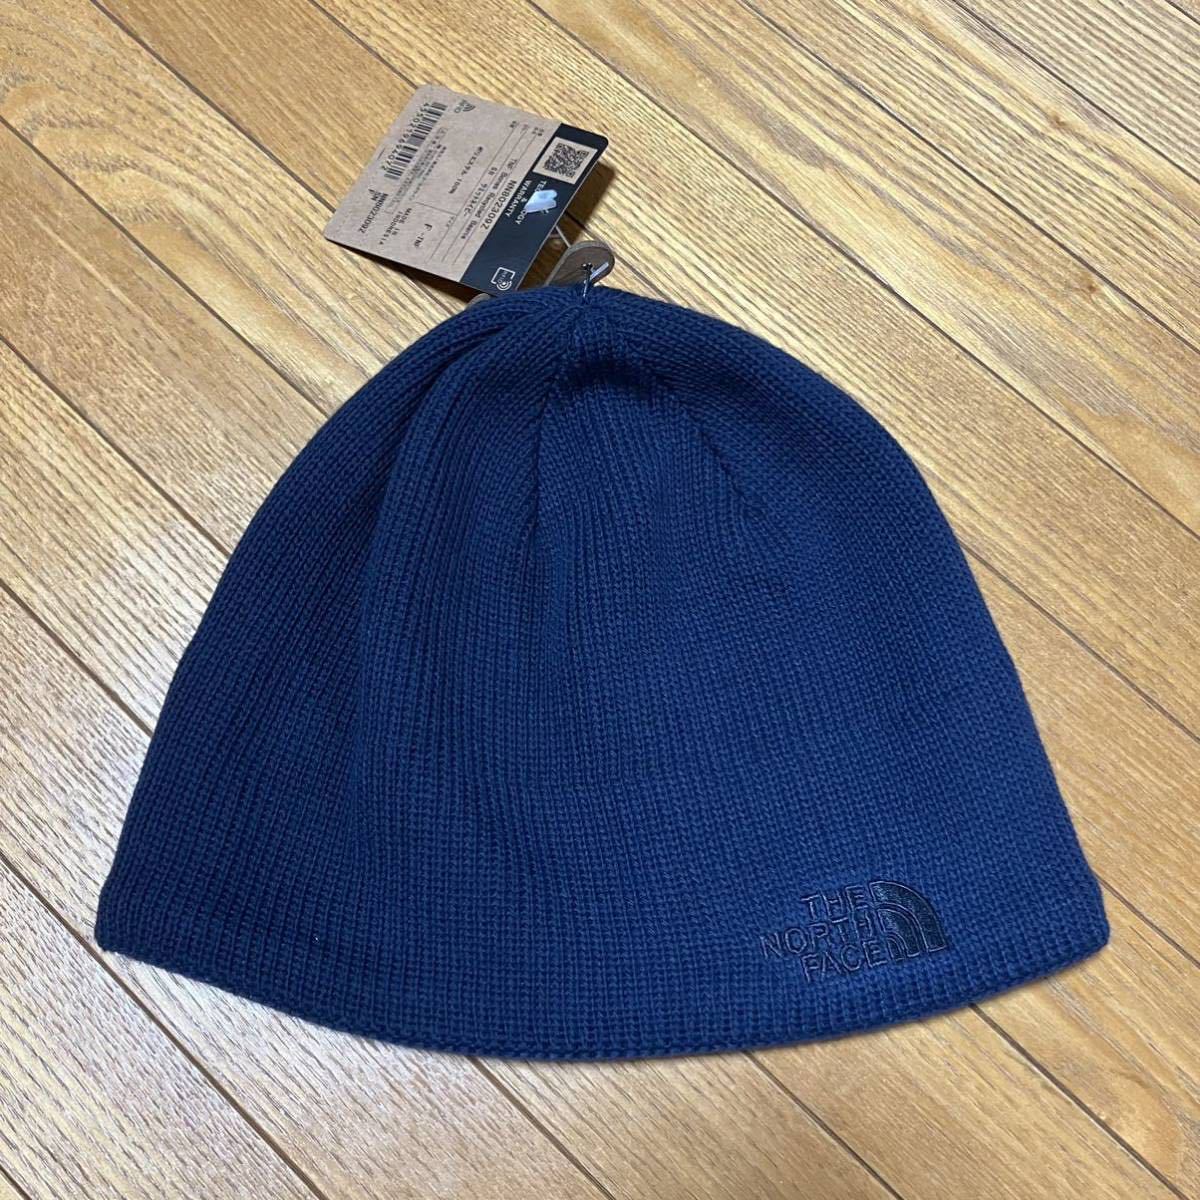 TNF North Face Logo knitted cap navy F size including carriage 